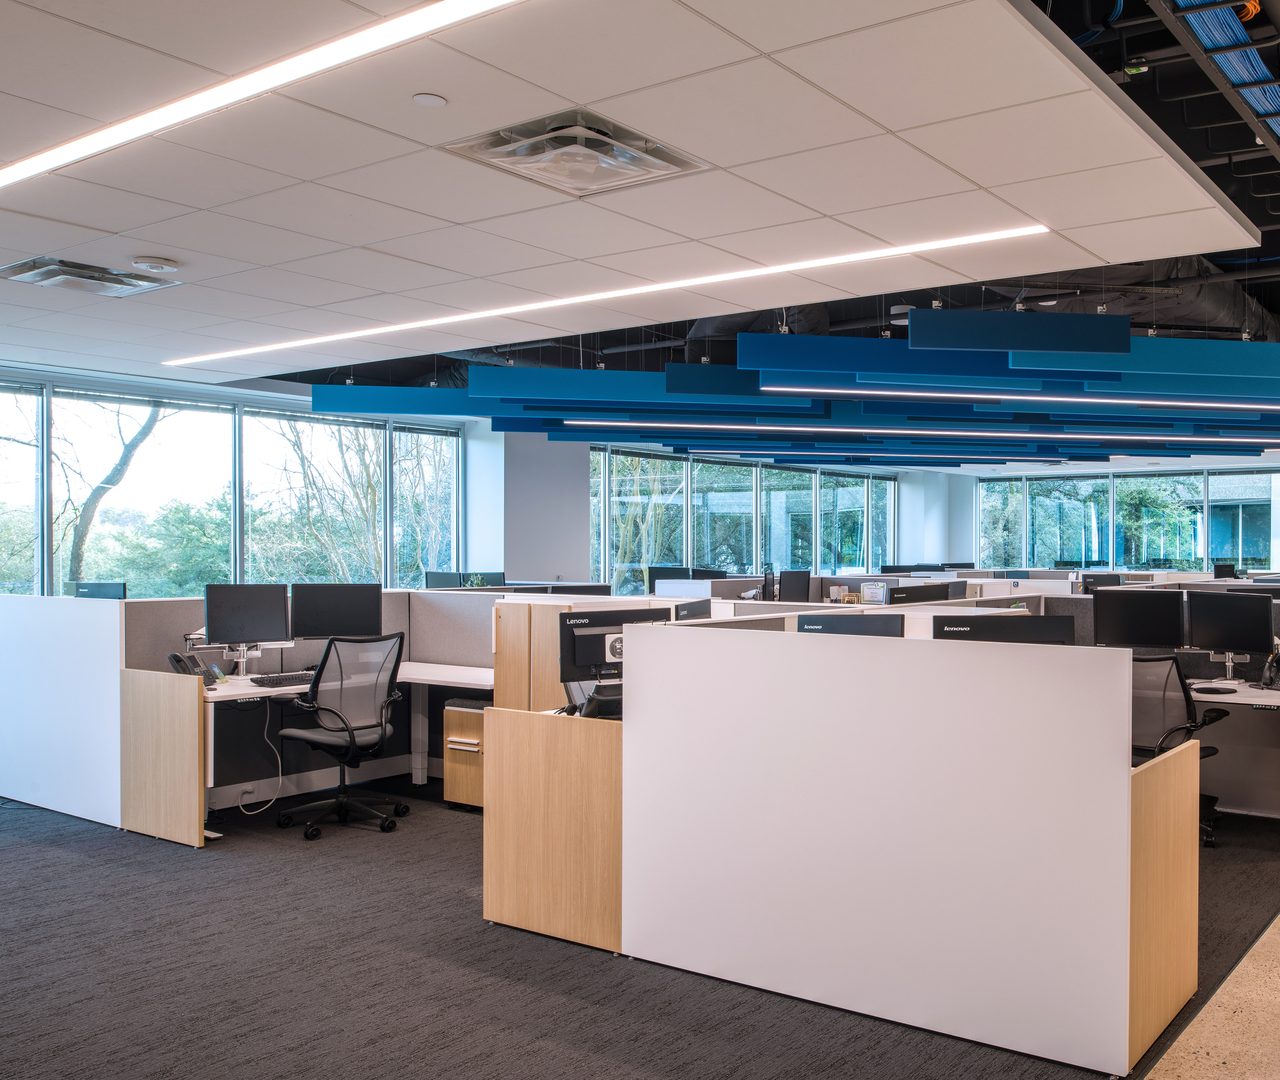 Allergans Austin offices high-performance functionality meets inspired interiors with ceiling systems. 